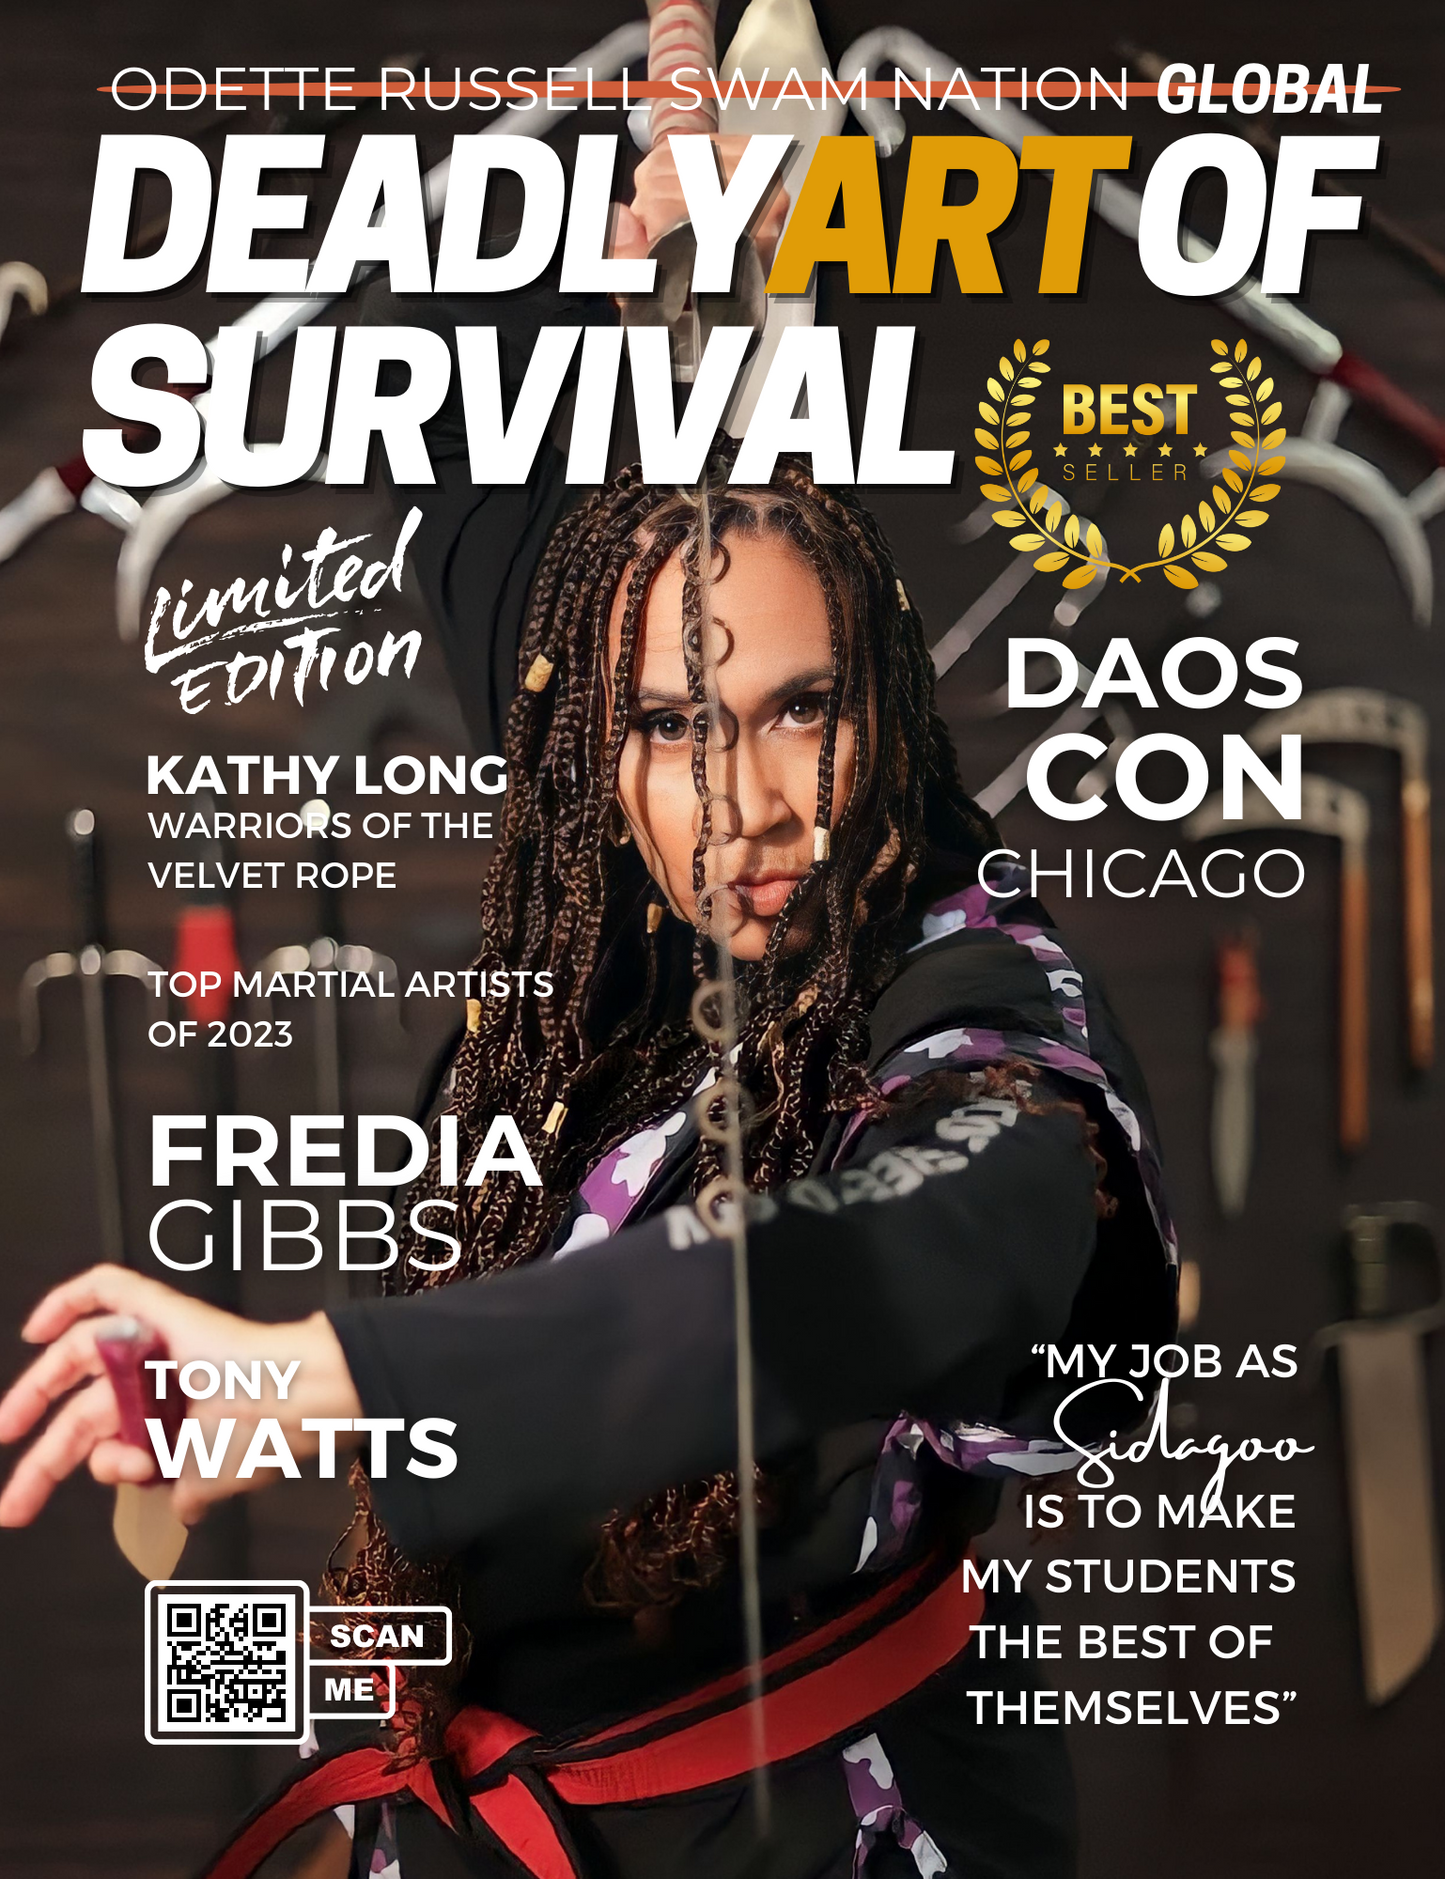 Deadly Art of Survival Magazine 14th Edition: Featuring Odette Russell The #1 Martial Arts Magazine Worldwide (Copy) deadlyartofsurvival.com